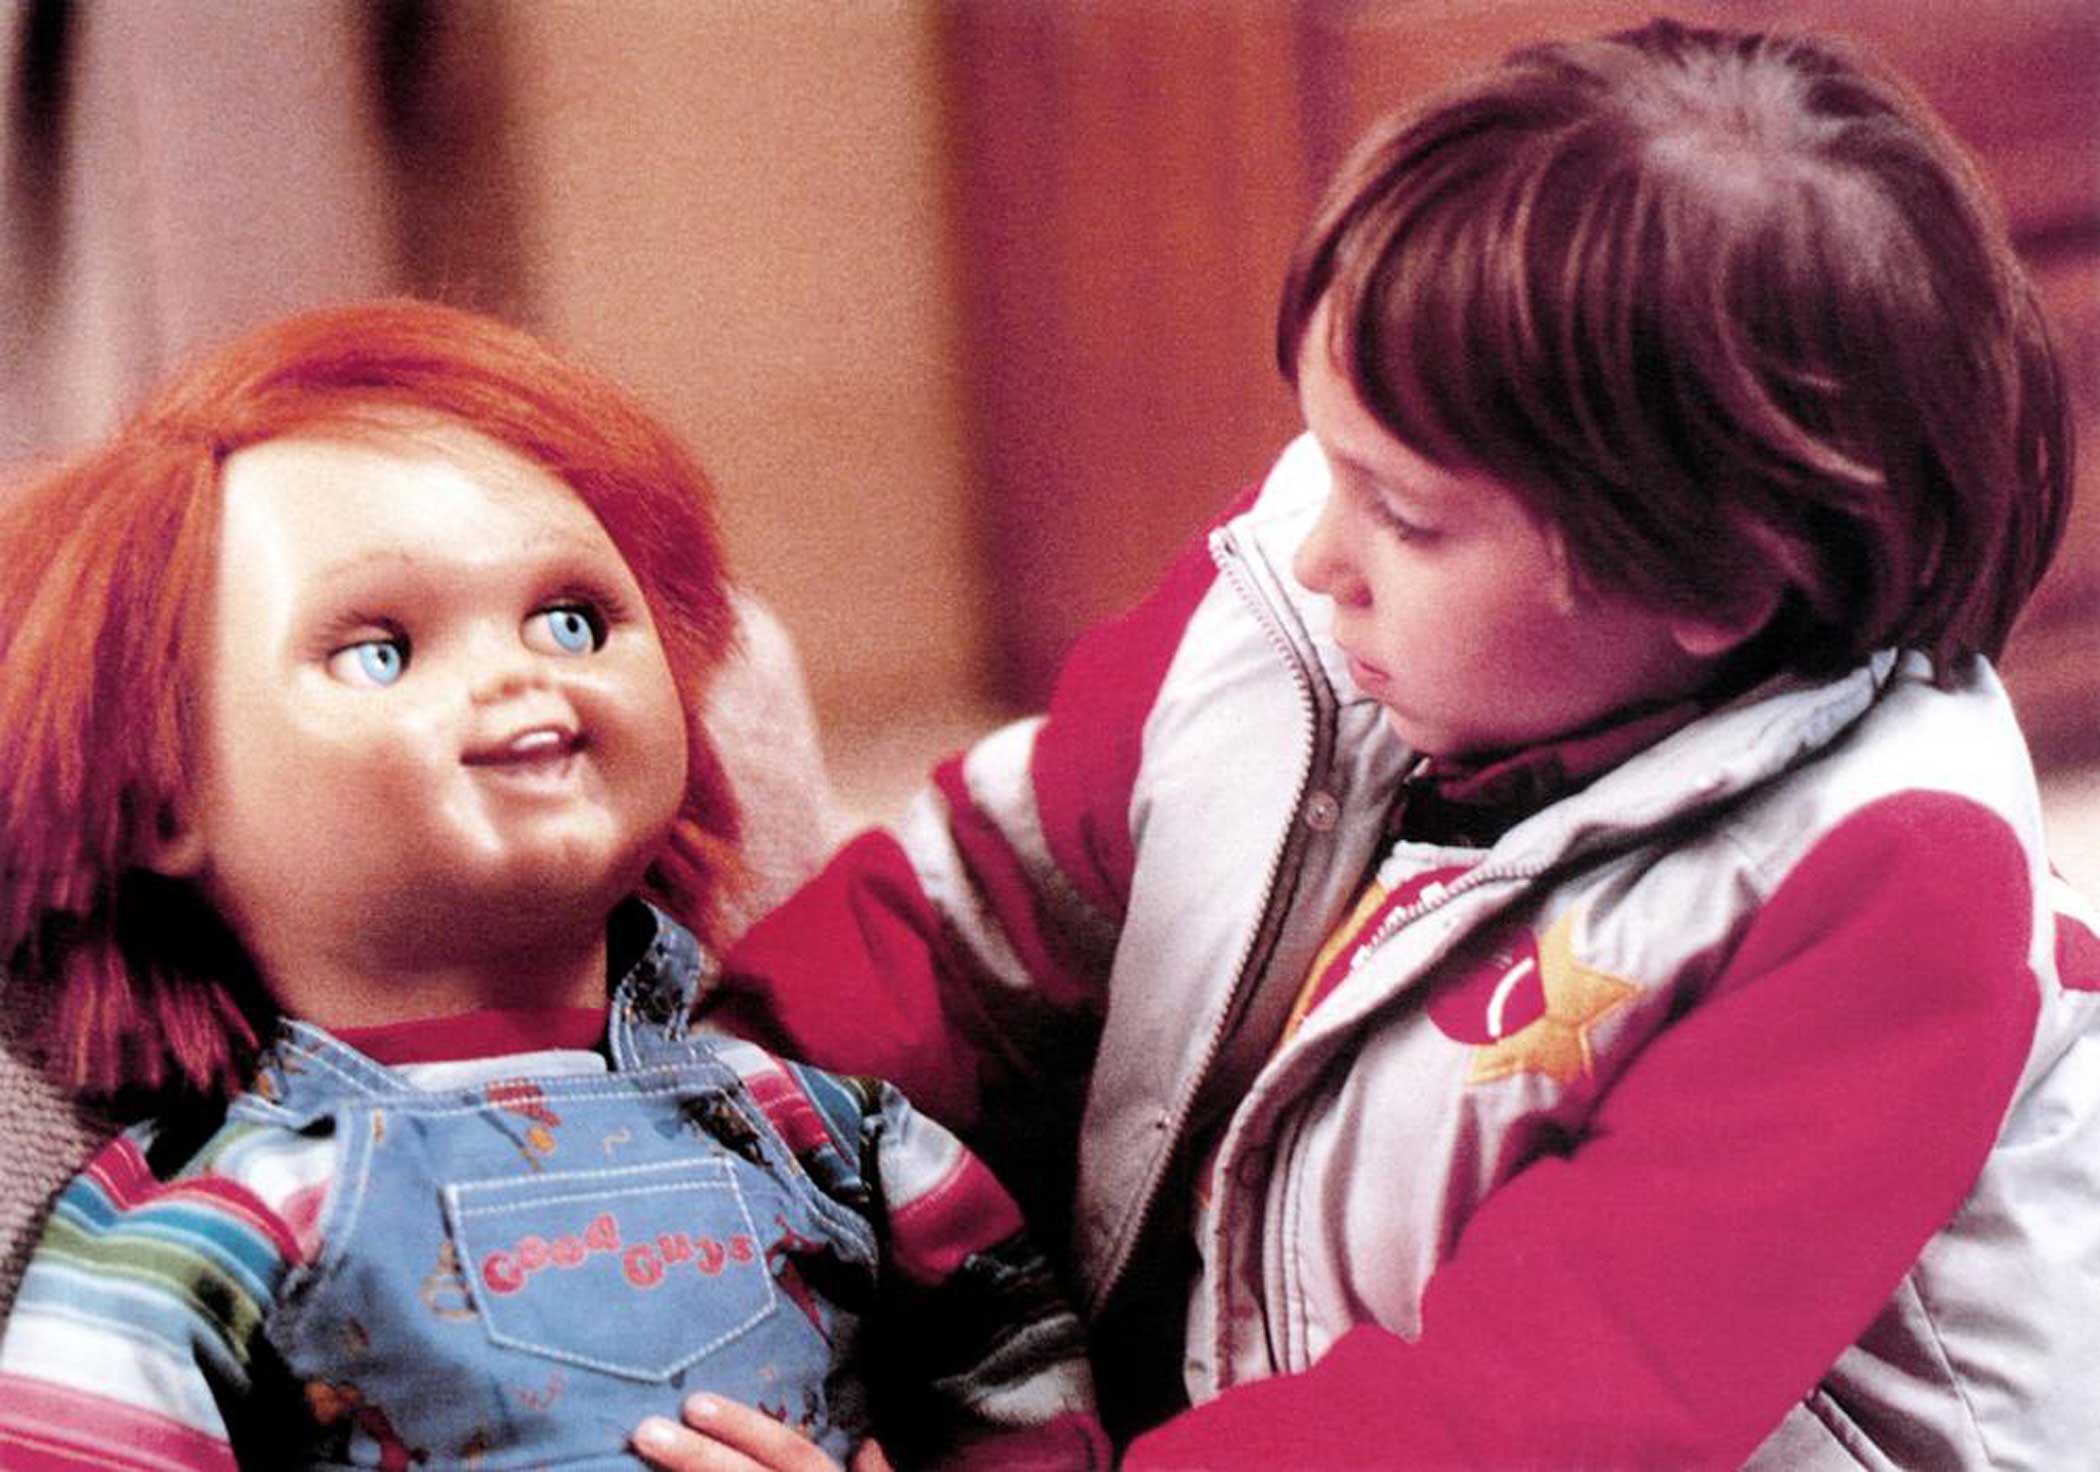 Child's Play, 1988 Inspired by Robert the Doll, in 1903, 3-year-old Robert Eugene Otto received the doll as a gift, named it after himself and were inseparable ever since. Shortly after, his parents thought they heard voices from the doll, with others claiming they thought the doll glared at them. Chucky's full name, Charles Lee Ray, is also derived from the names of killers Charles Manson, Lee Harvey Oswald, and James Earl Ray.